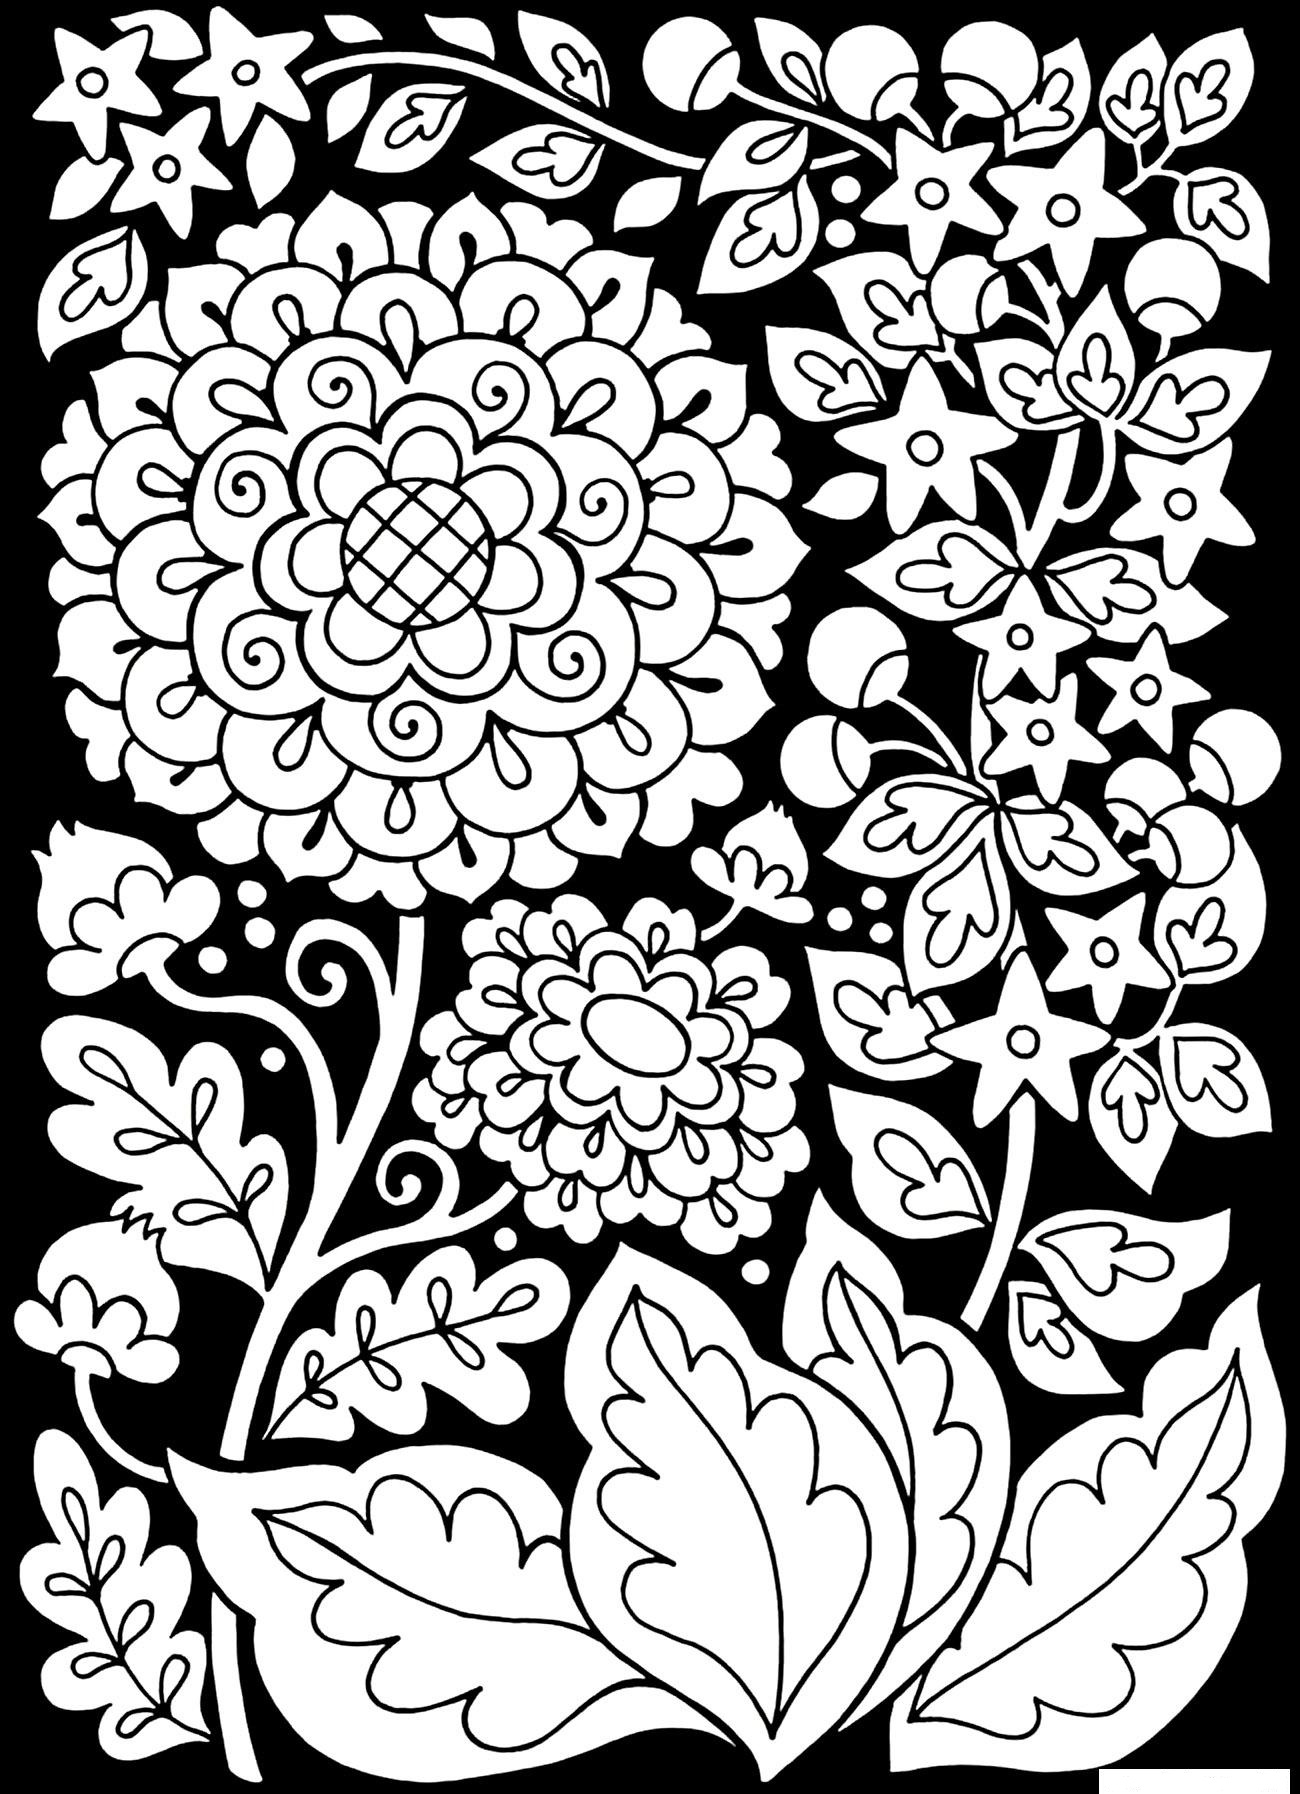 Black Background With Flowers Coloring Page